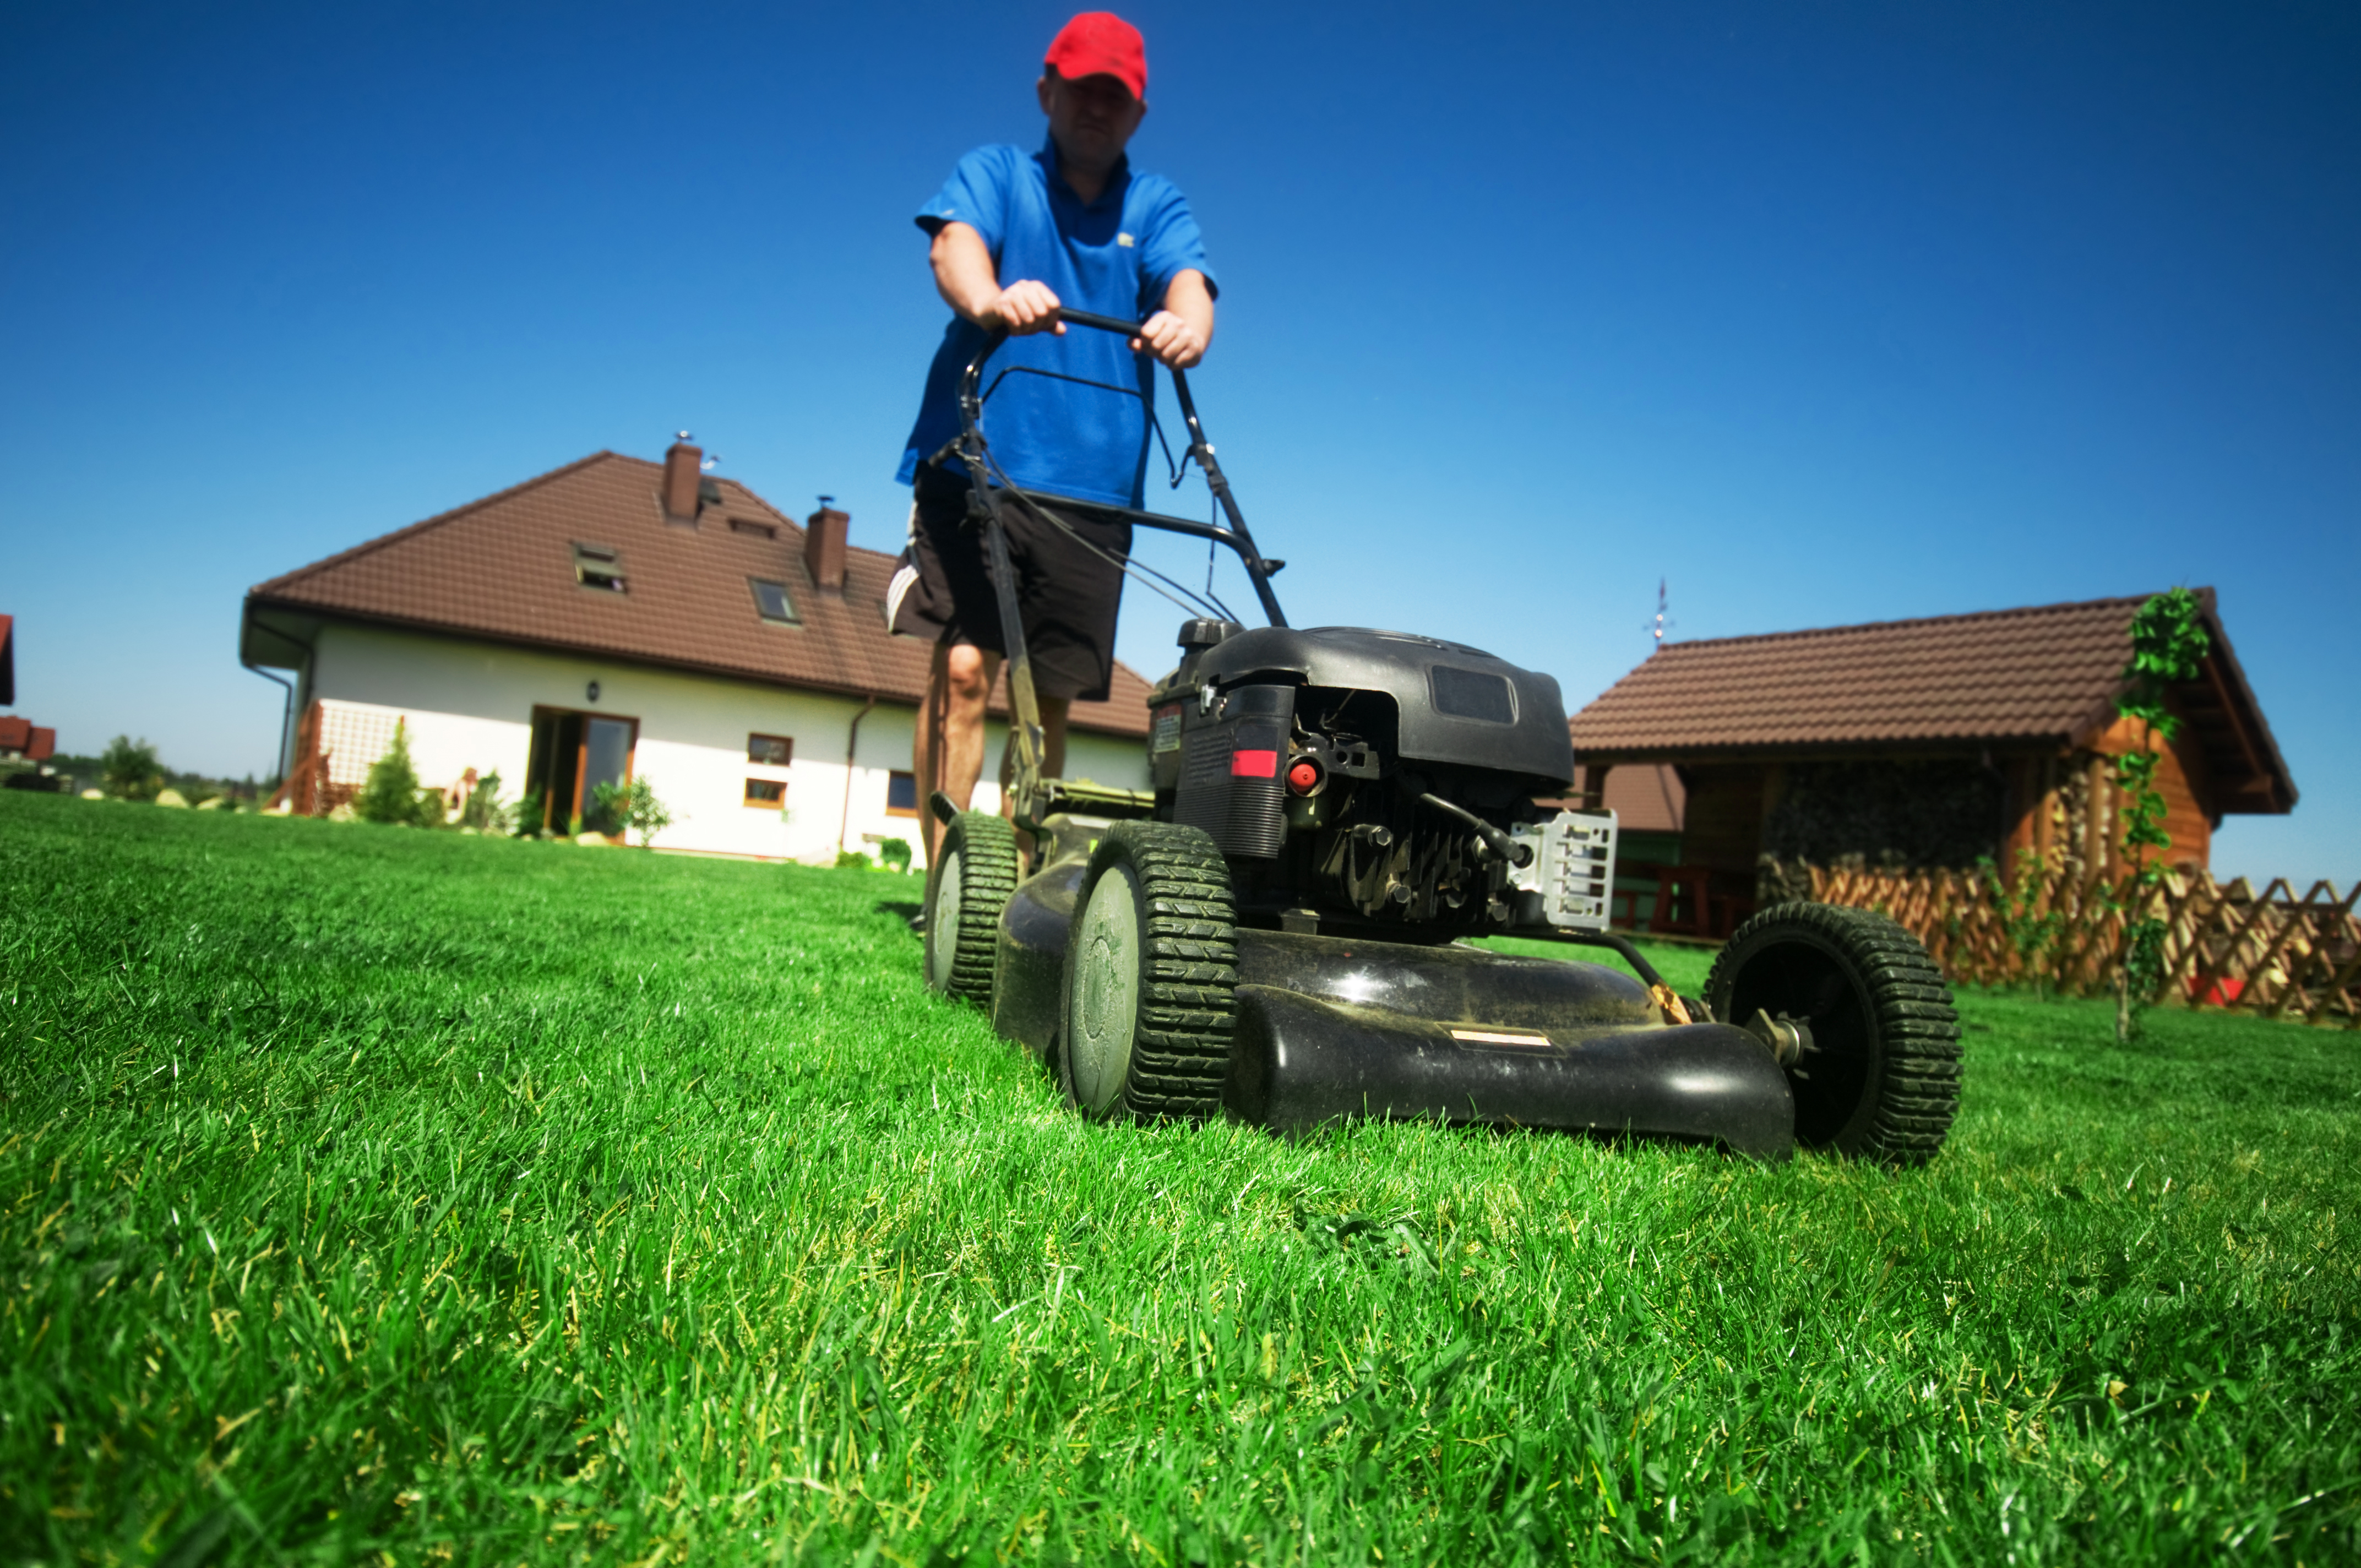 Summer lawn care